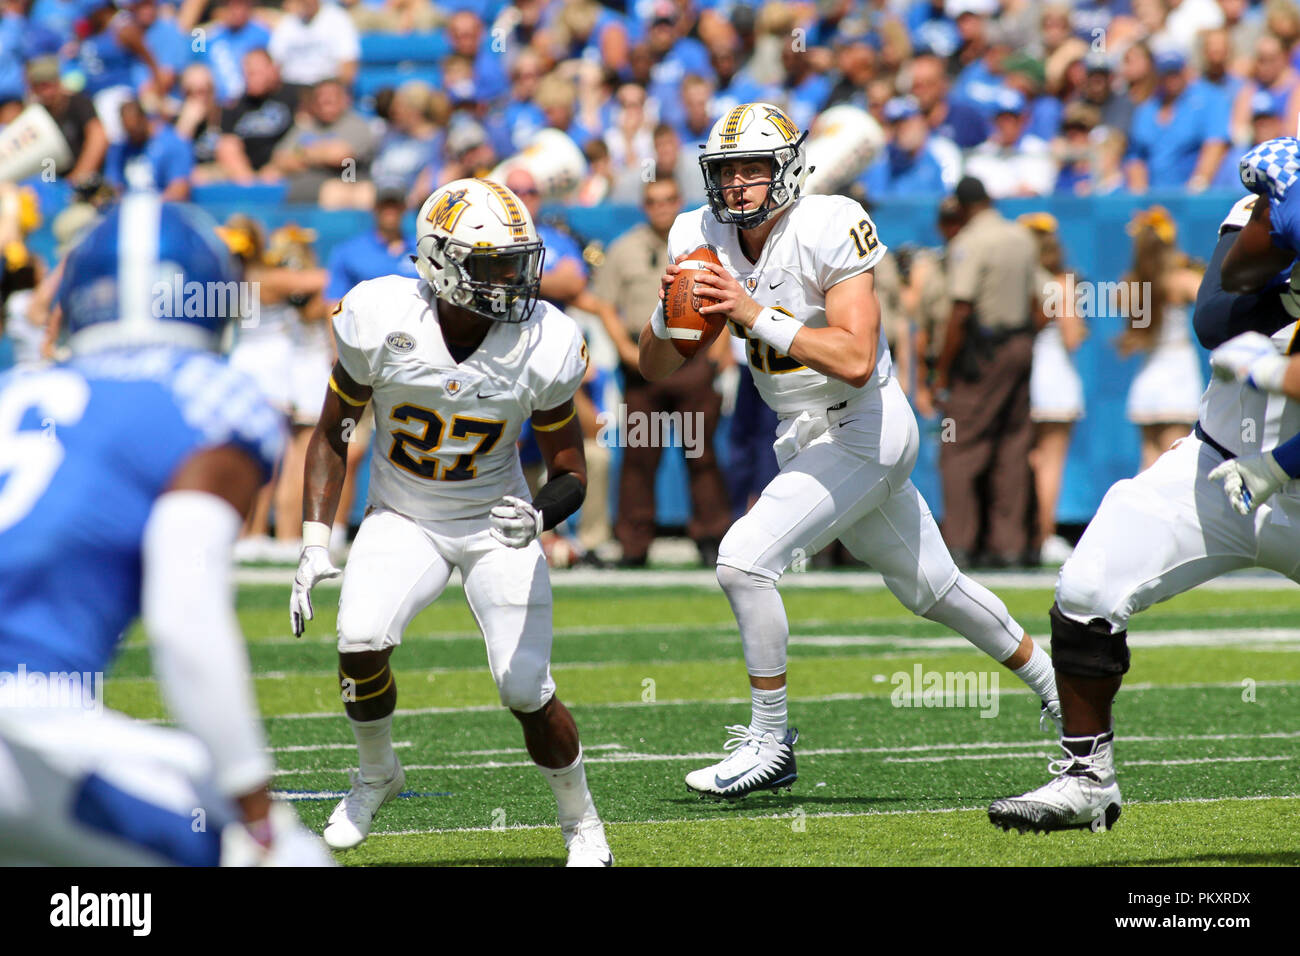 Lexington, Kentucky, USA. 15th Sep, 2018. Murray State Racers QB Drew Anderson (12) looks to throw during an NCAA football game between the Kentucky Wildcats and the Murray State Racers at Kroger Field in Lexington, Kentucky. Kevin Schultz/CSM/Alamy Live News Stock Photo